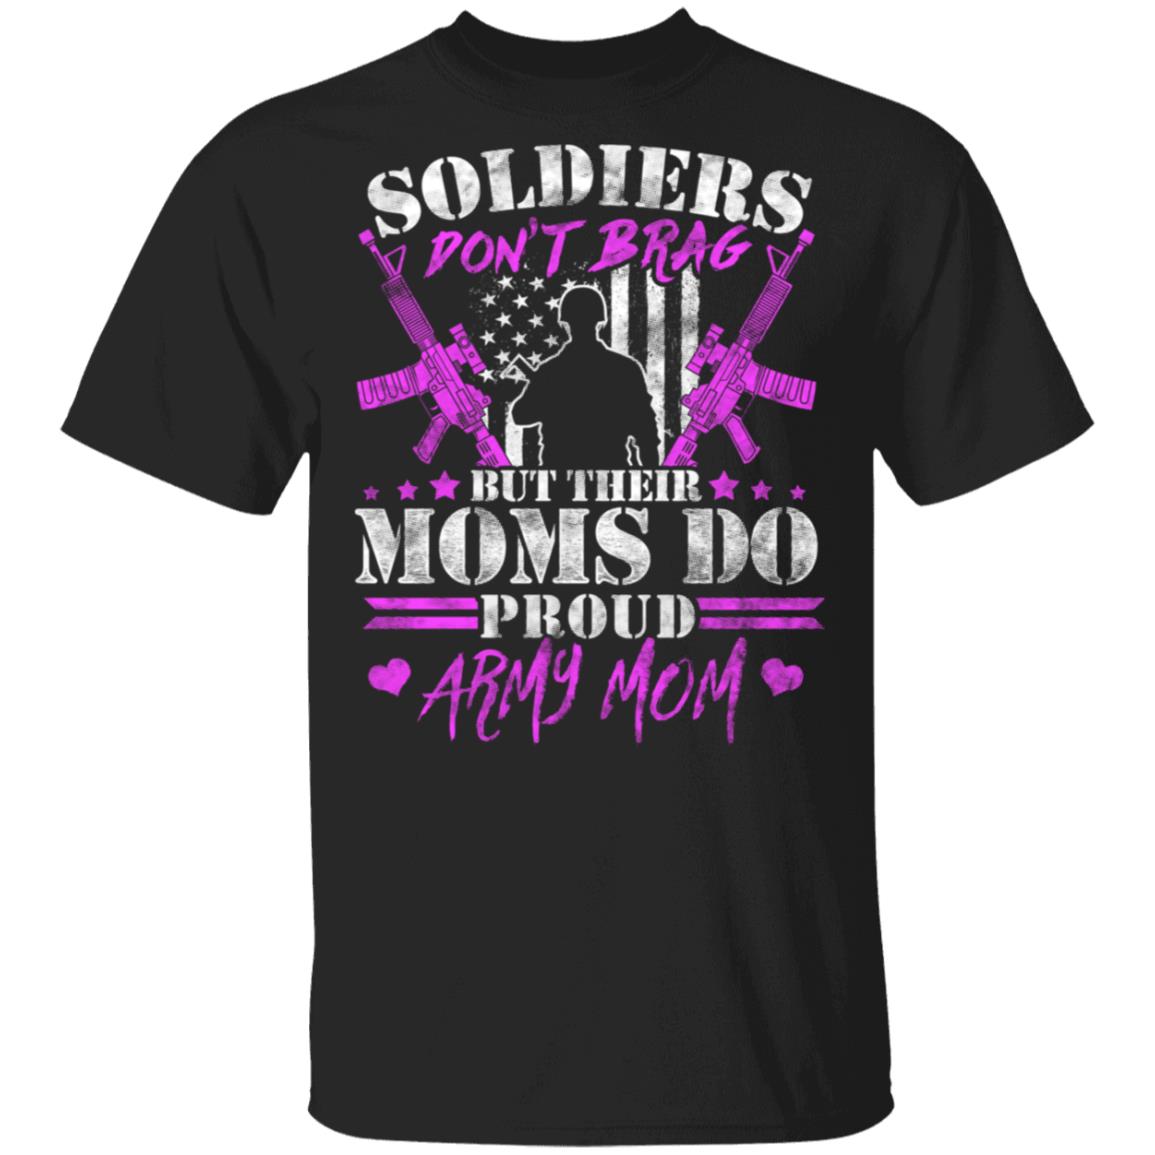 Soldiers Don't Brag But Their Moms Do T-shirt Proud Army Mom Shirt